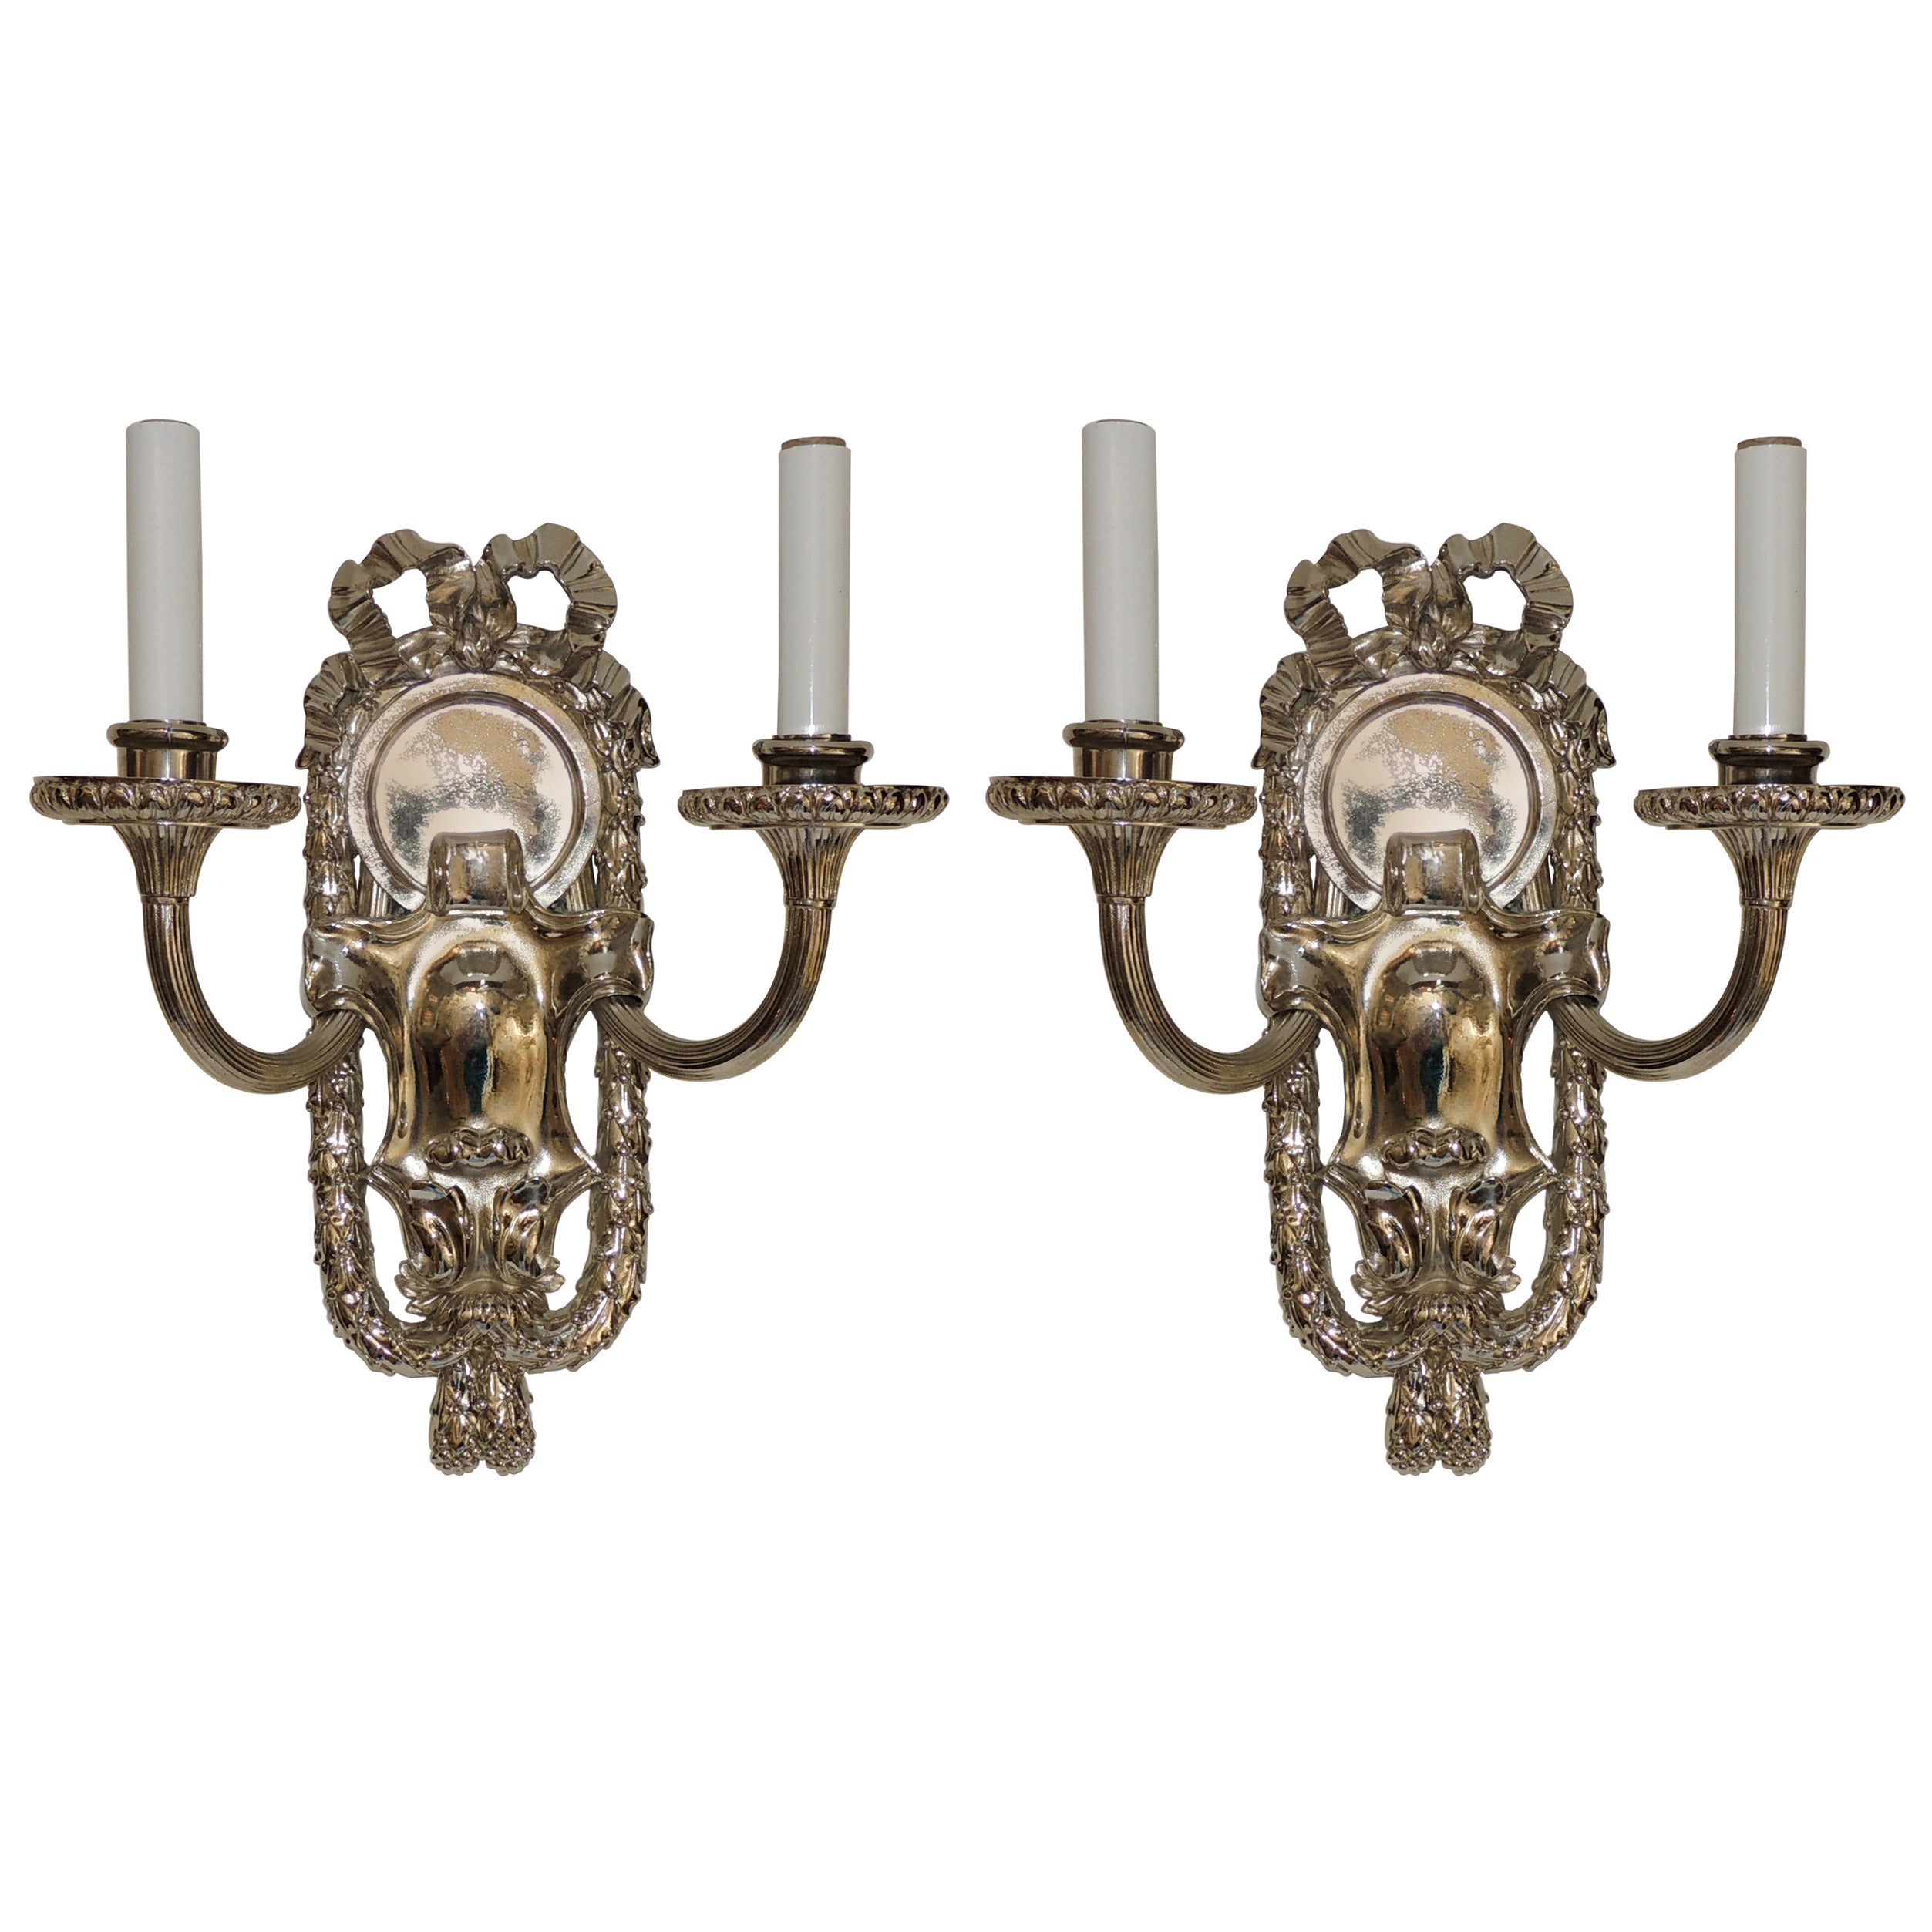 Incredible Pair Polished Nickel Silver Caldwell Bow Top Neoclassical Sconces